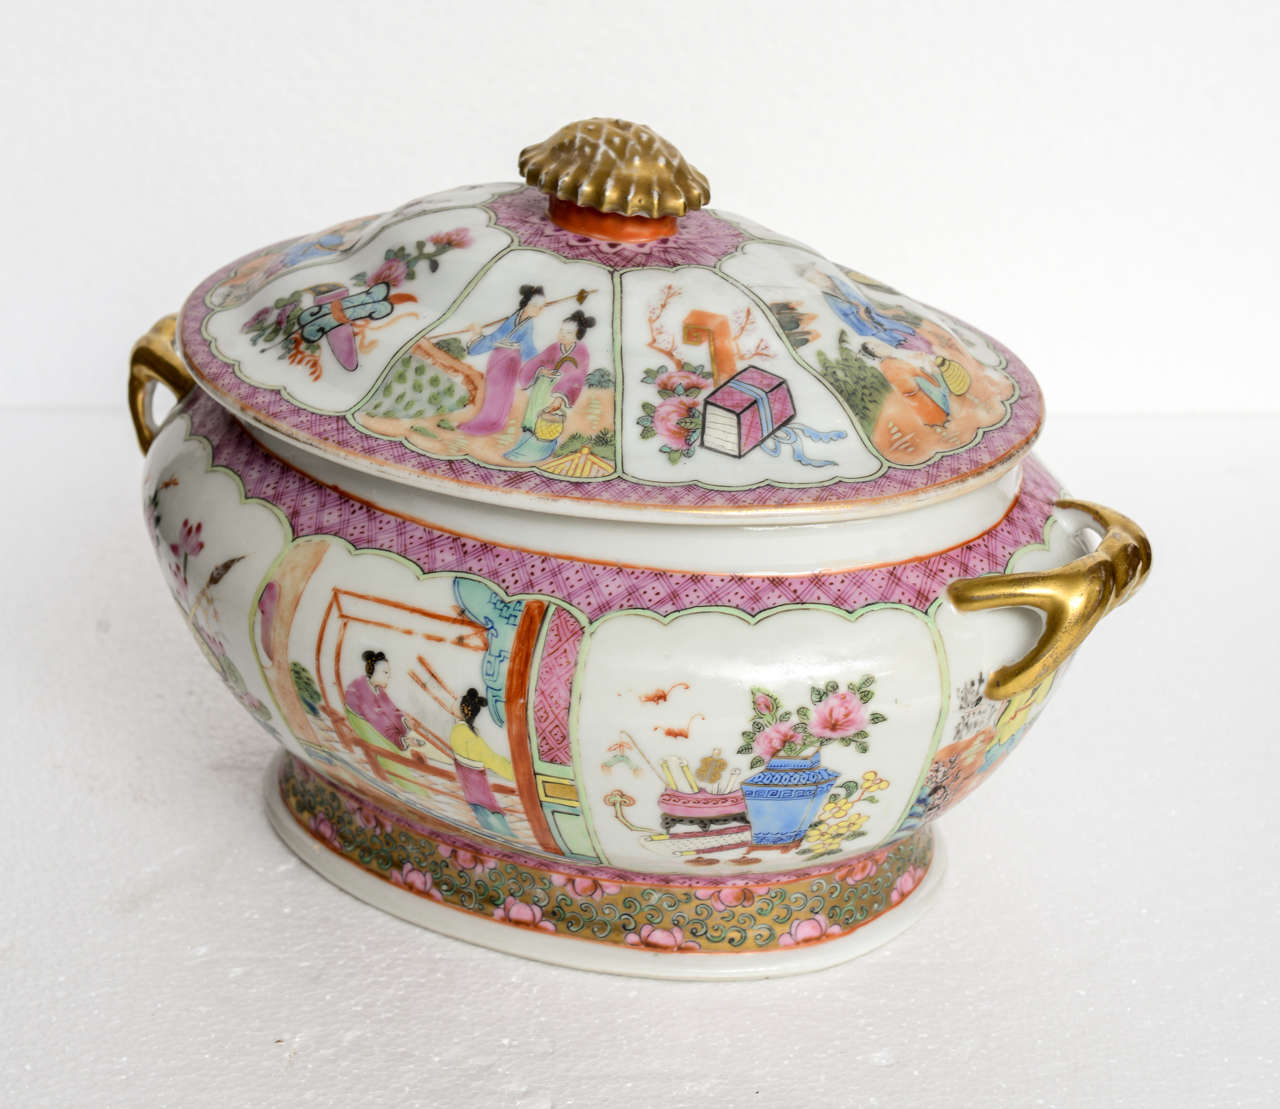 Chinese Famille Rose Tureen with Cover; beautifully detailed with gold handles & acorn lid pull.  No damages seen.

Originally $ 1,250.00

CHECK OUR INVENTORY FOR ADDITIONAL SALE ITEMS

Chinese porcelain Famile Rose porcelain punch bowl.